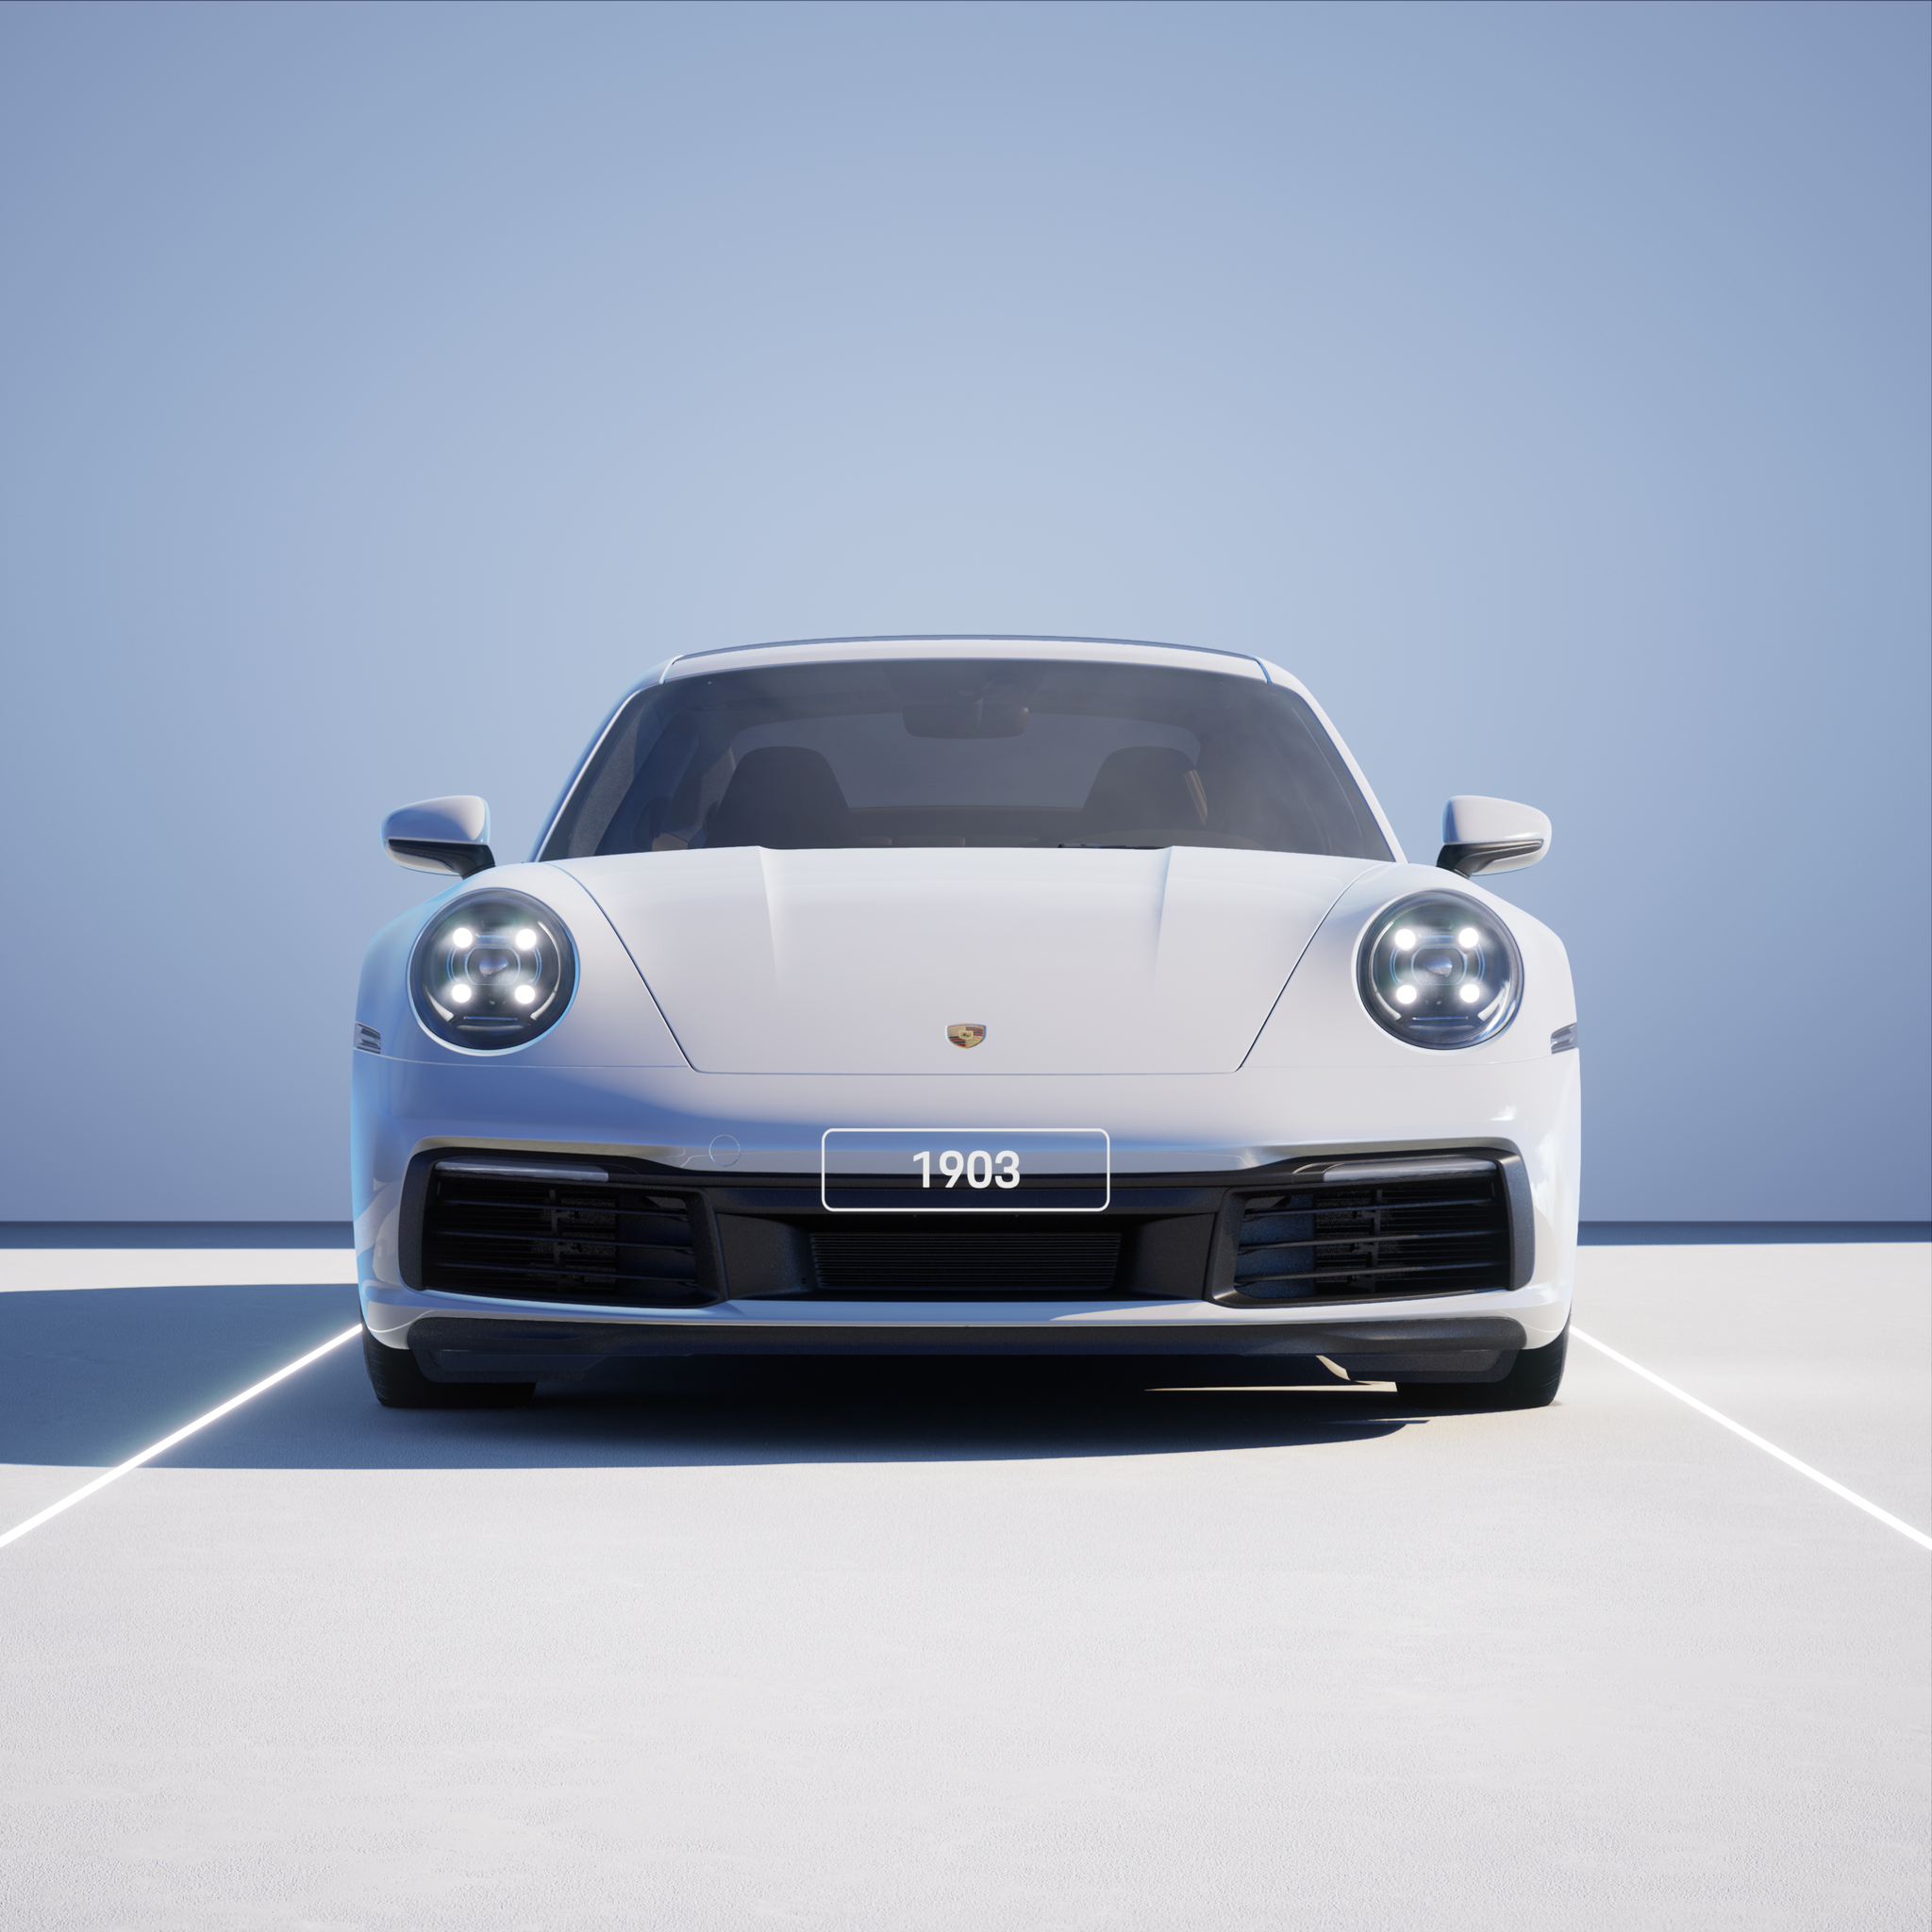 The PORSCHΞ 911 1903 image in phase